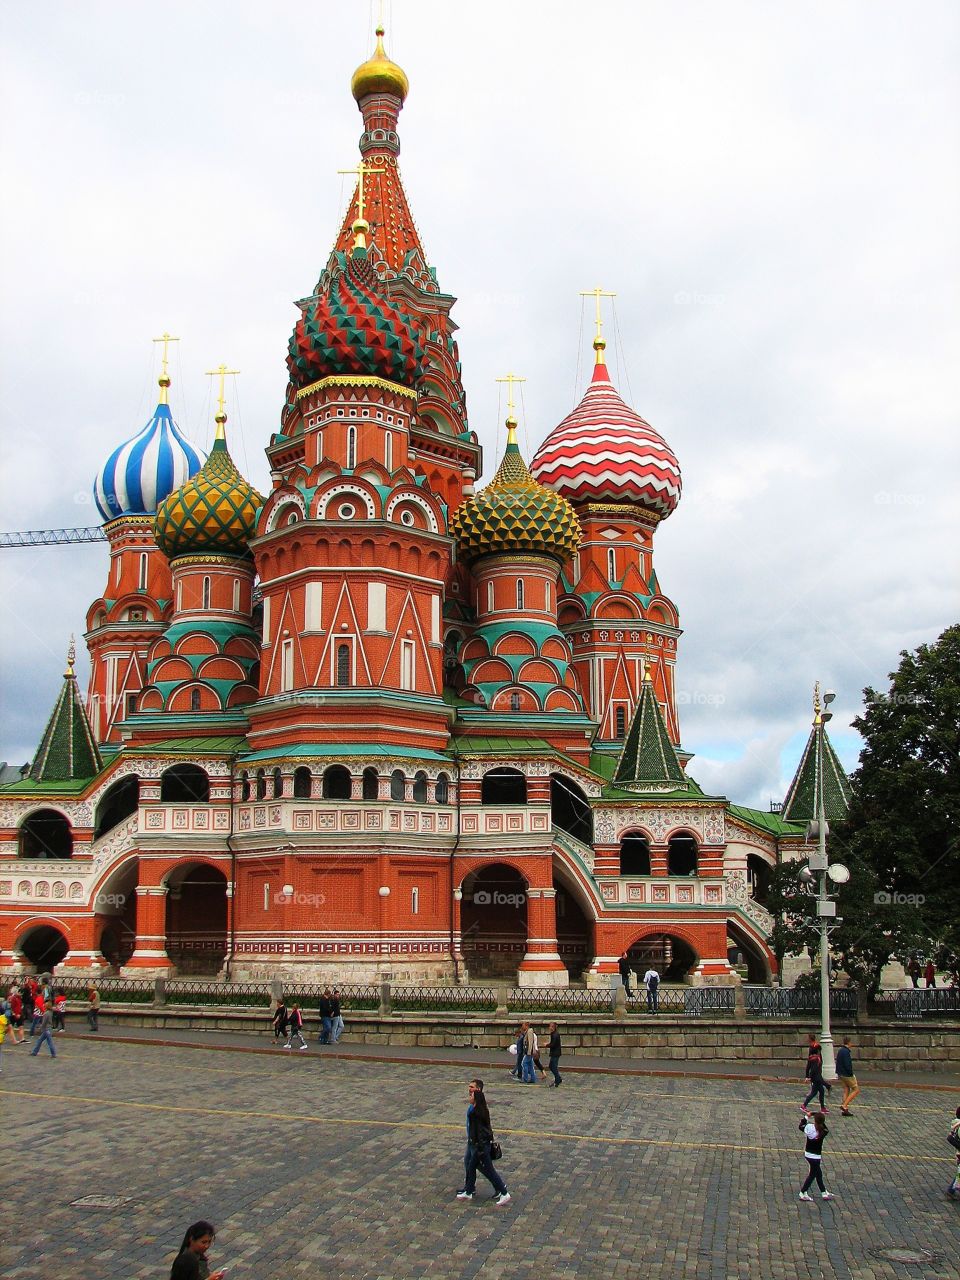 Russia. Moscow. Red Square. Journey. Excursion. Cathedral. domes. walk. summer evening. walk around the city. Centre.

 